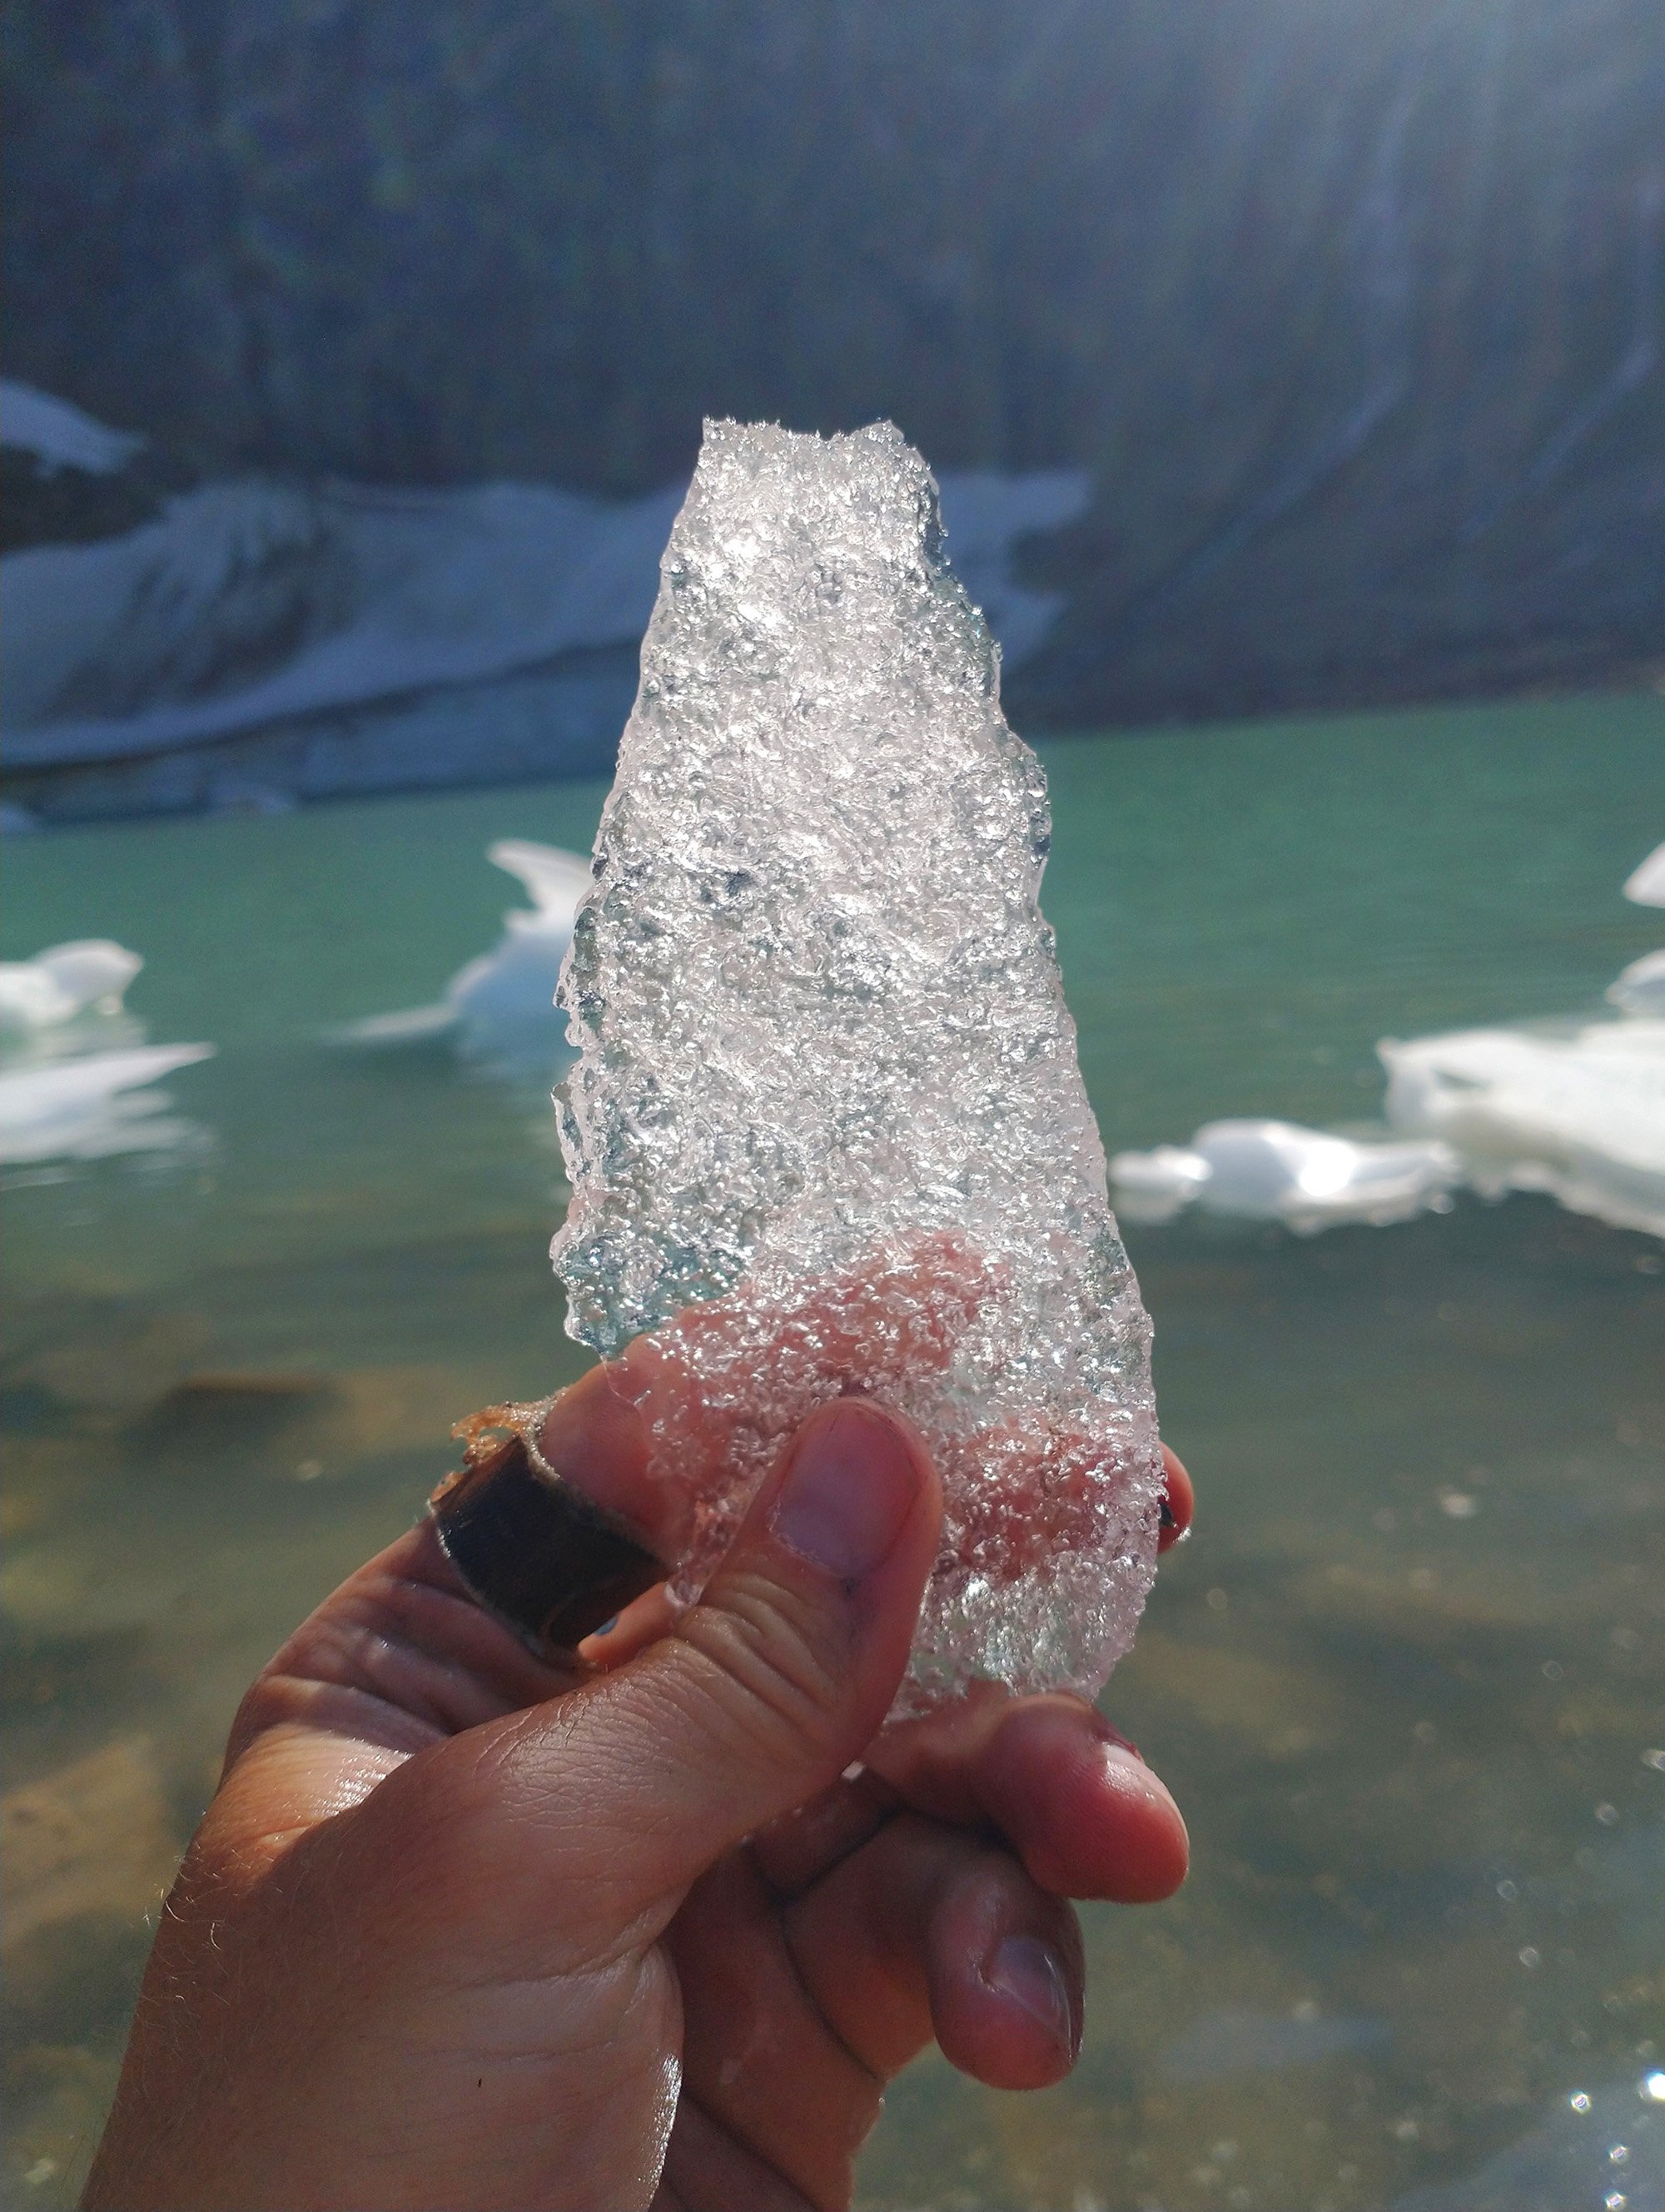 Put this shard of ice in my pocket to bring back home as a souvenir. 